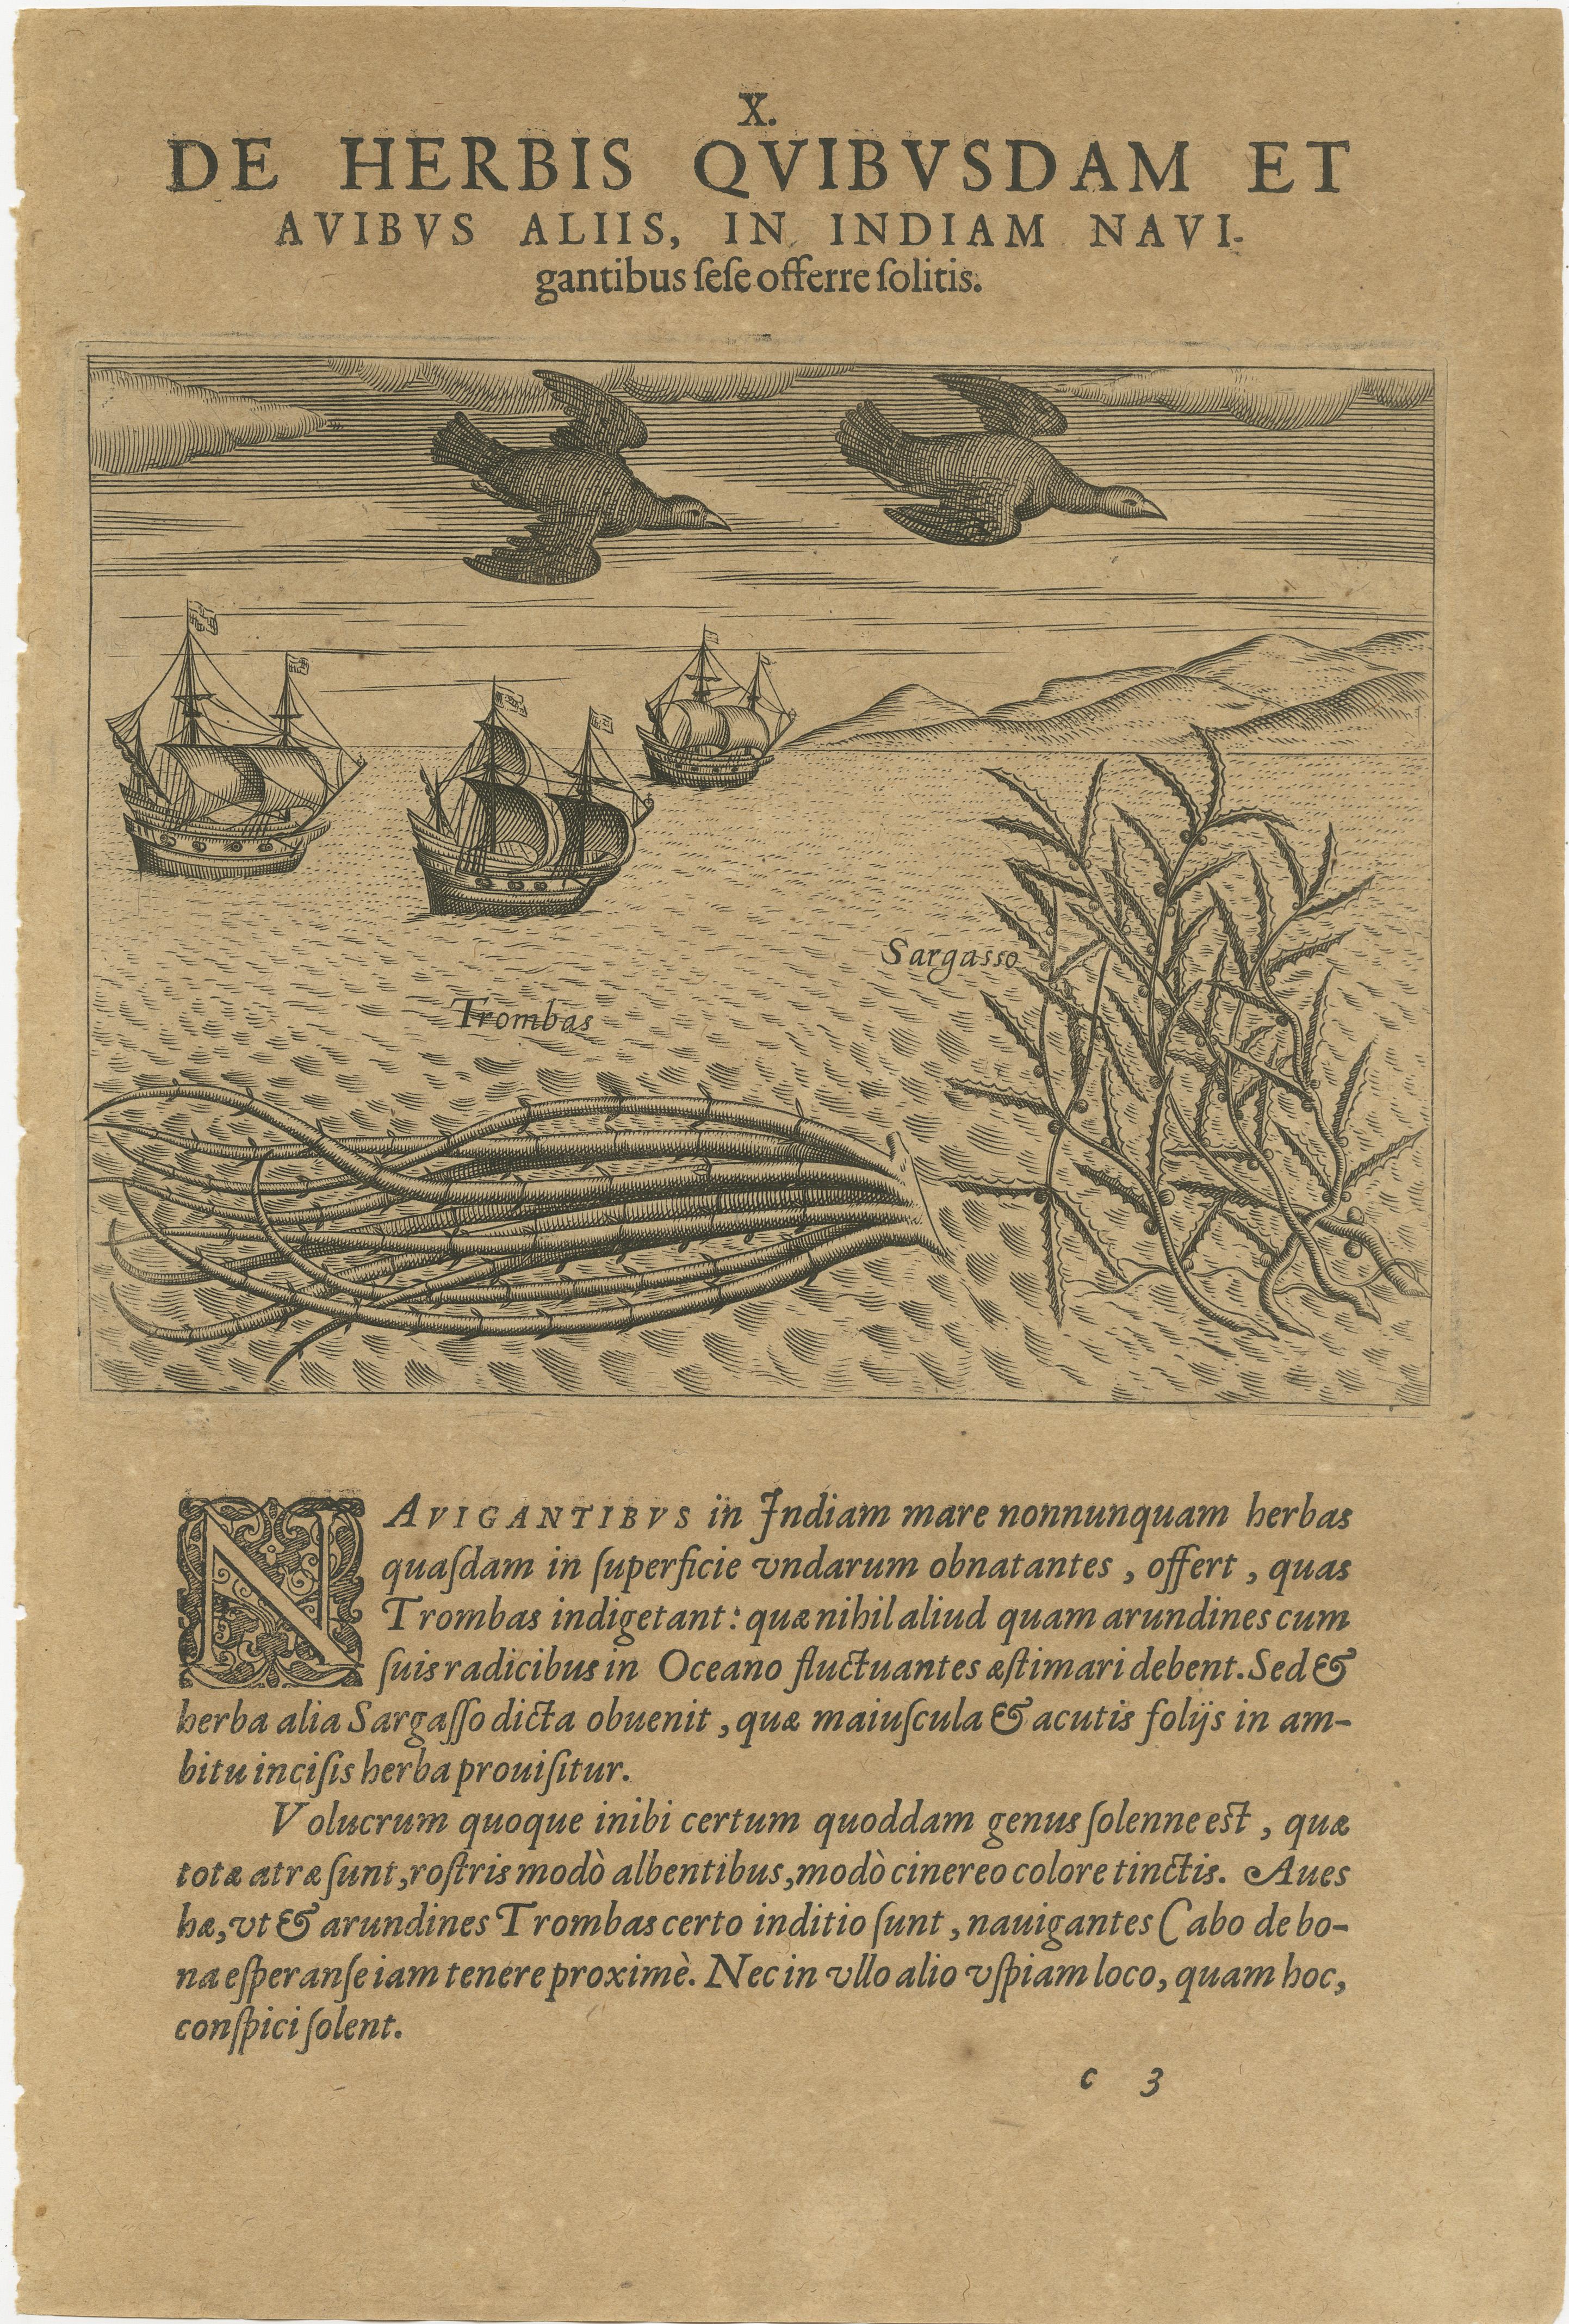 Maritime Life and Flora: Antique Engravings by De Bry, 1601 For Sale 2